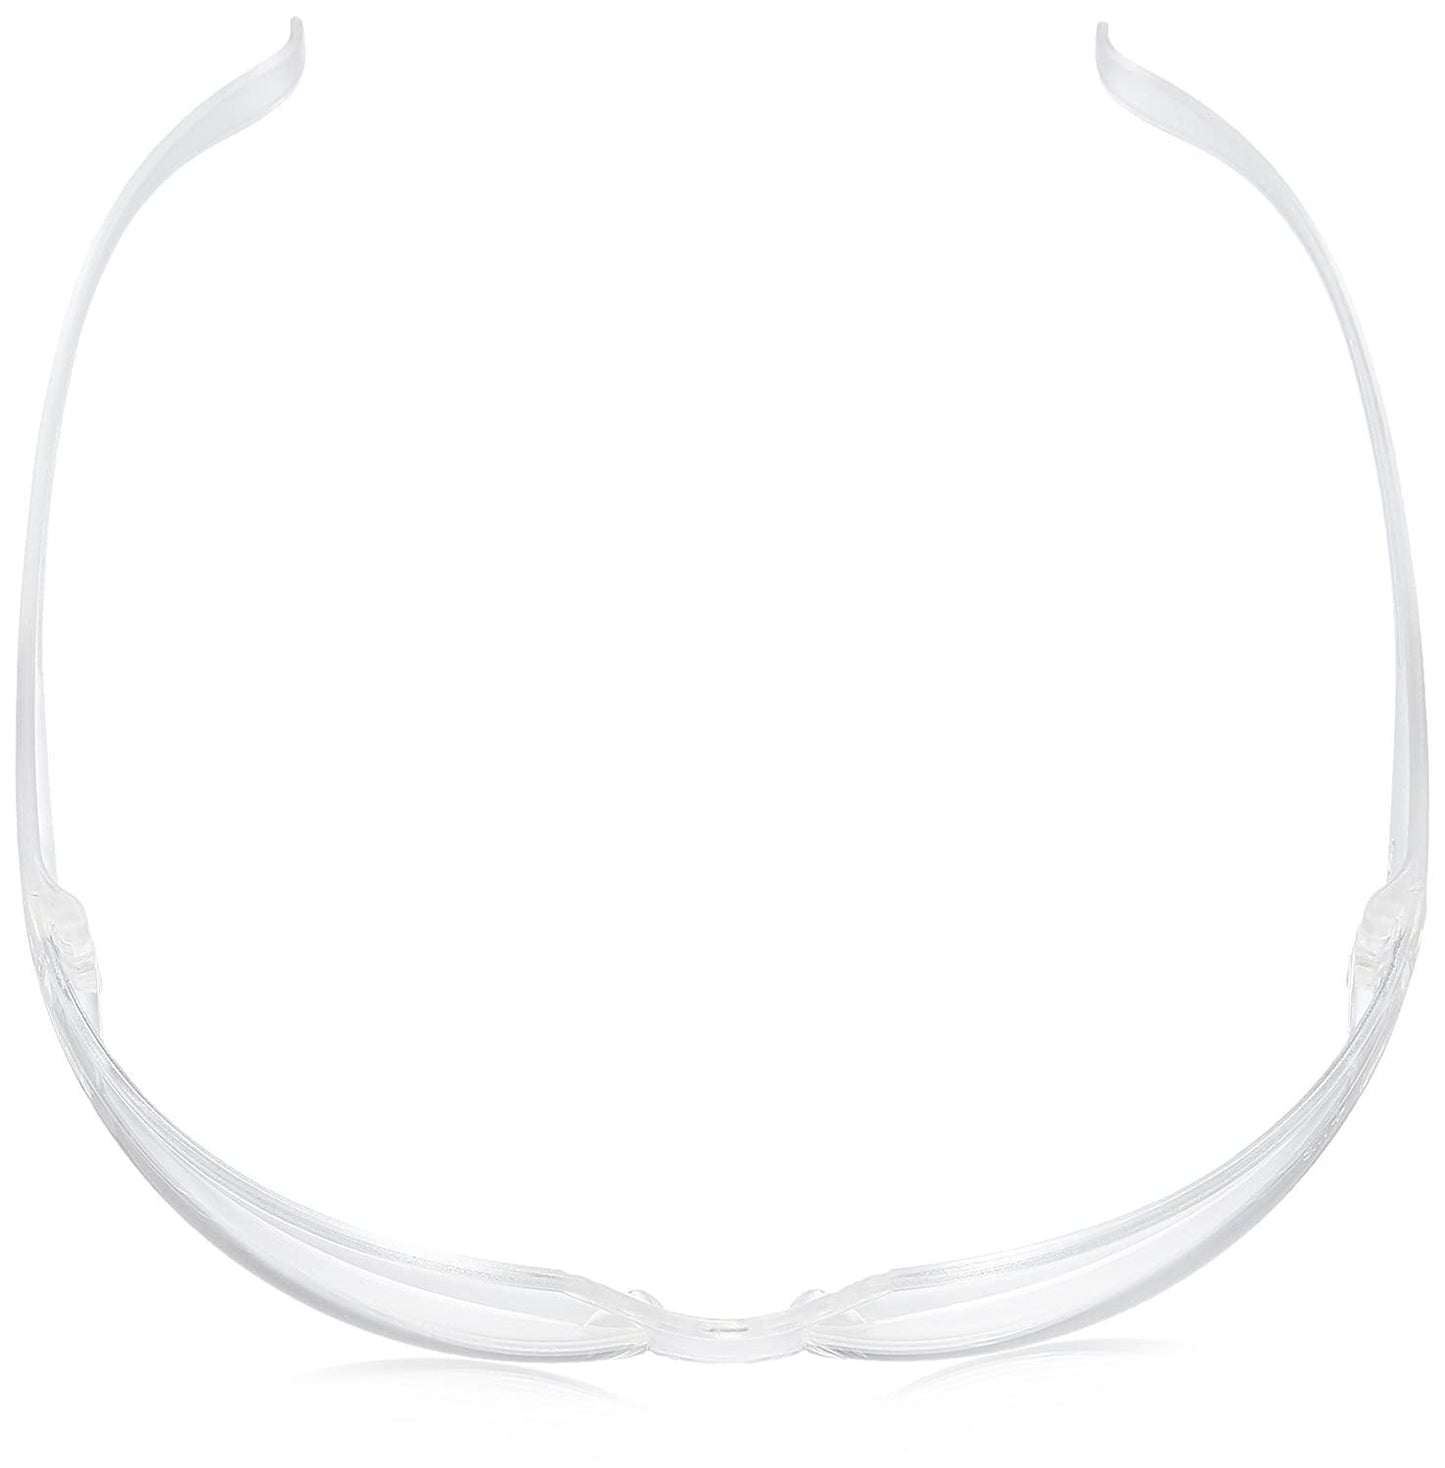 EYESafety Clear Covid Eye Protection Safety Glasses - Glasses India Online